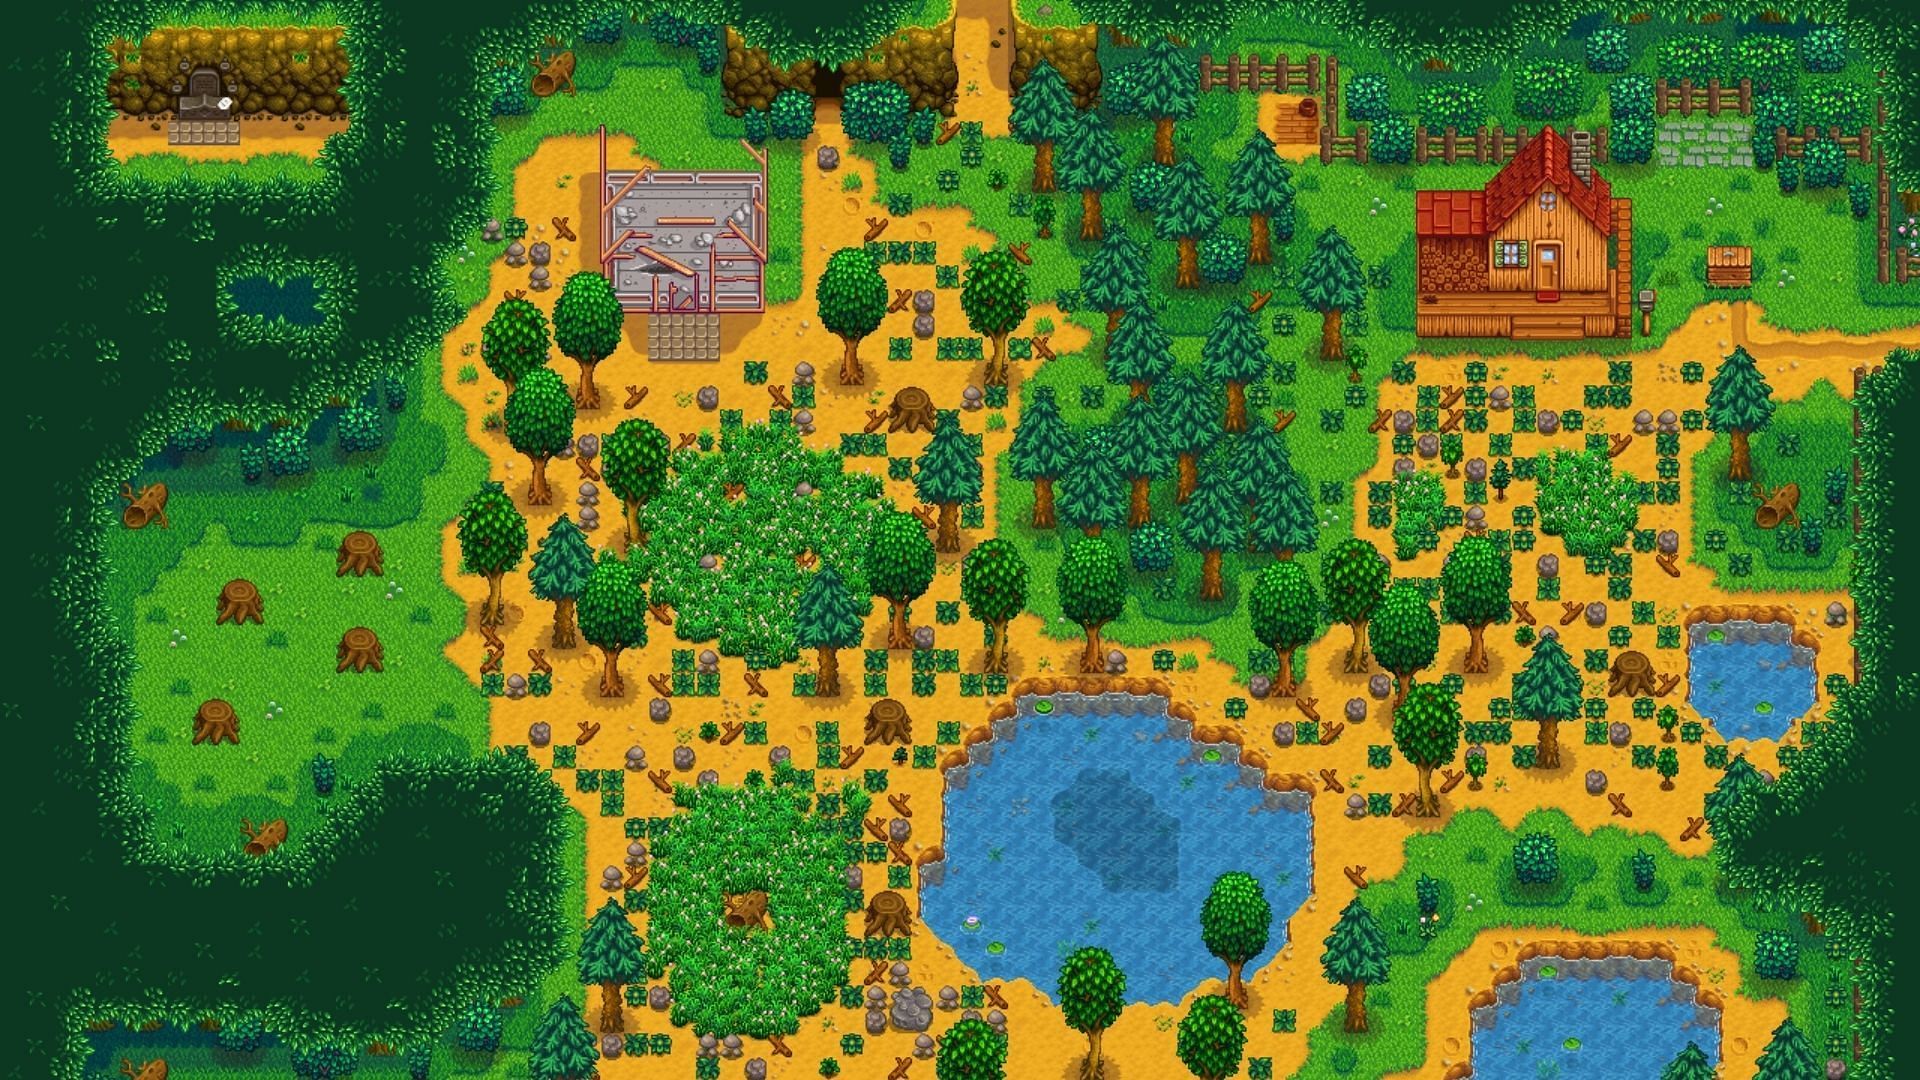 The Forest Farm layout provides ample hardwood and foraging resources. (Image via ConcernedApe)